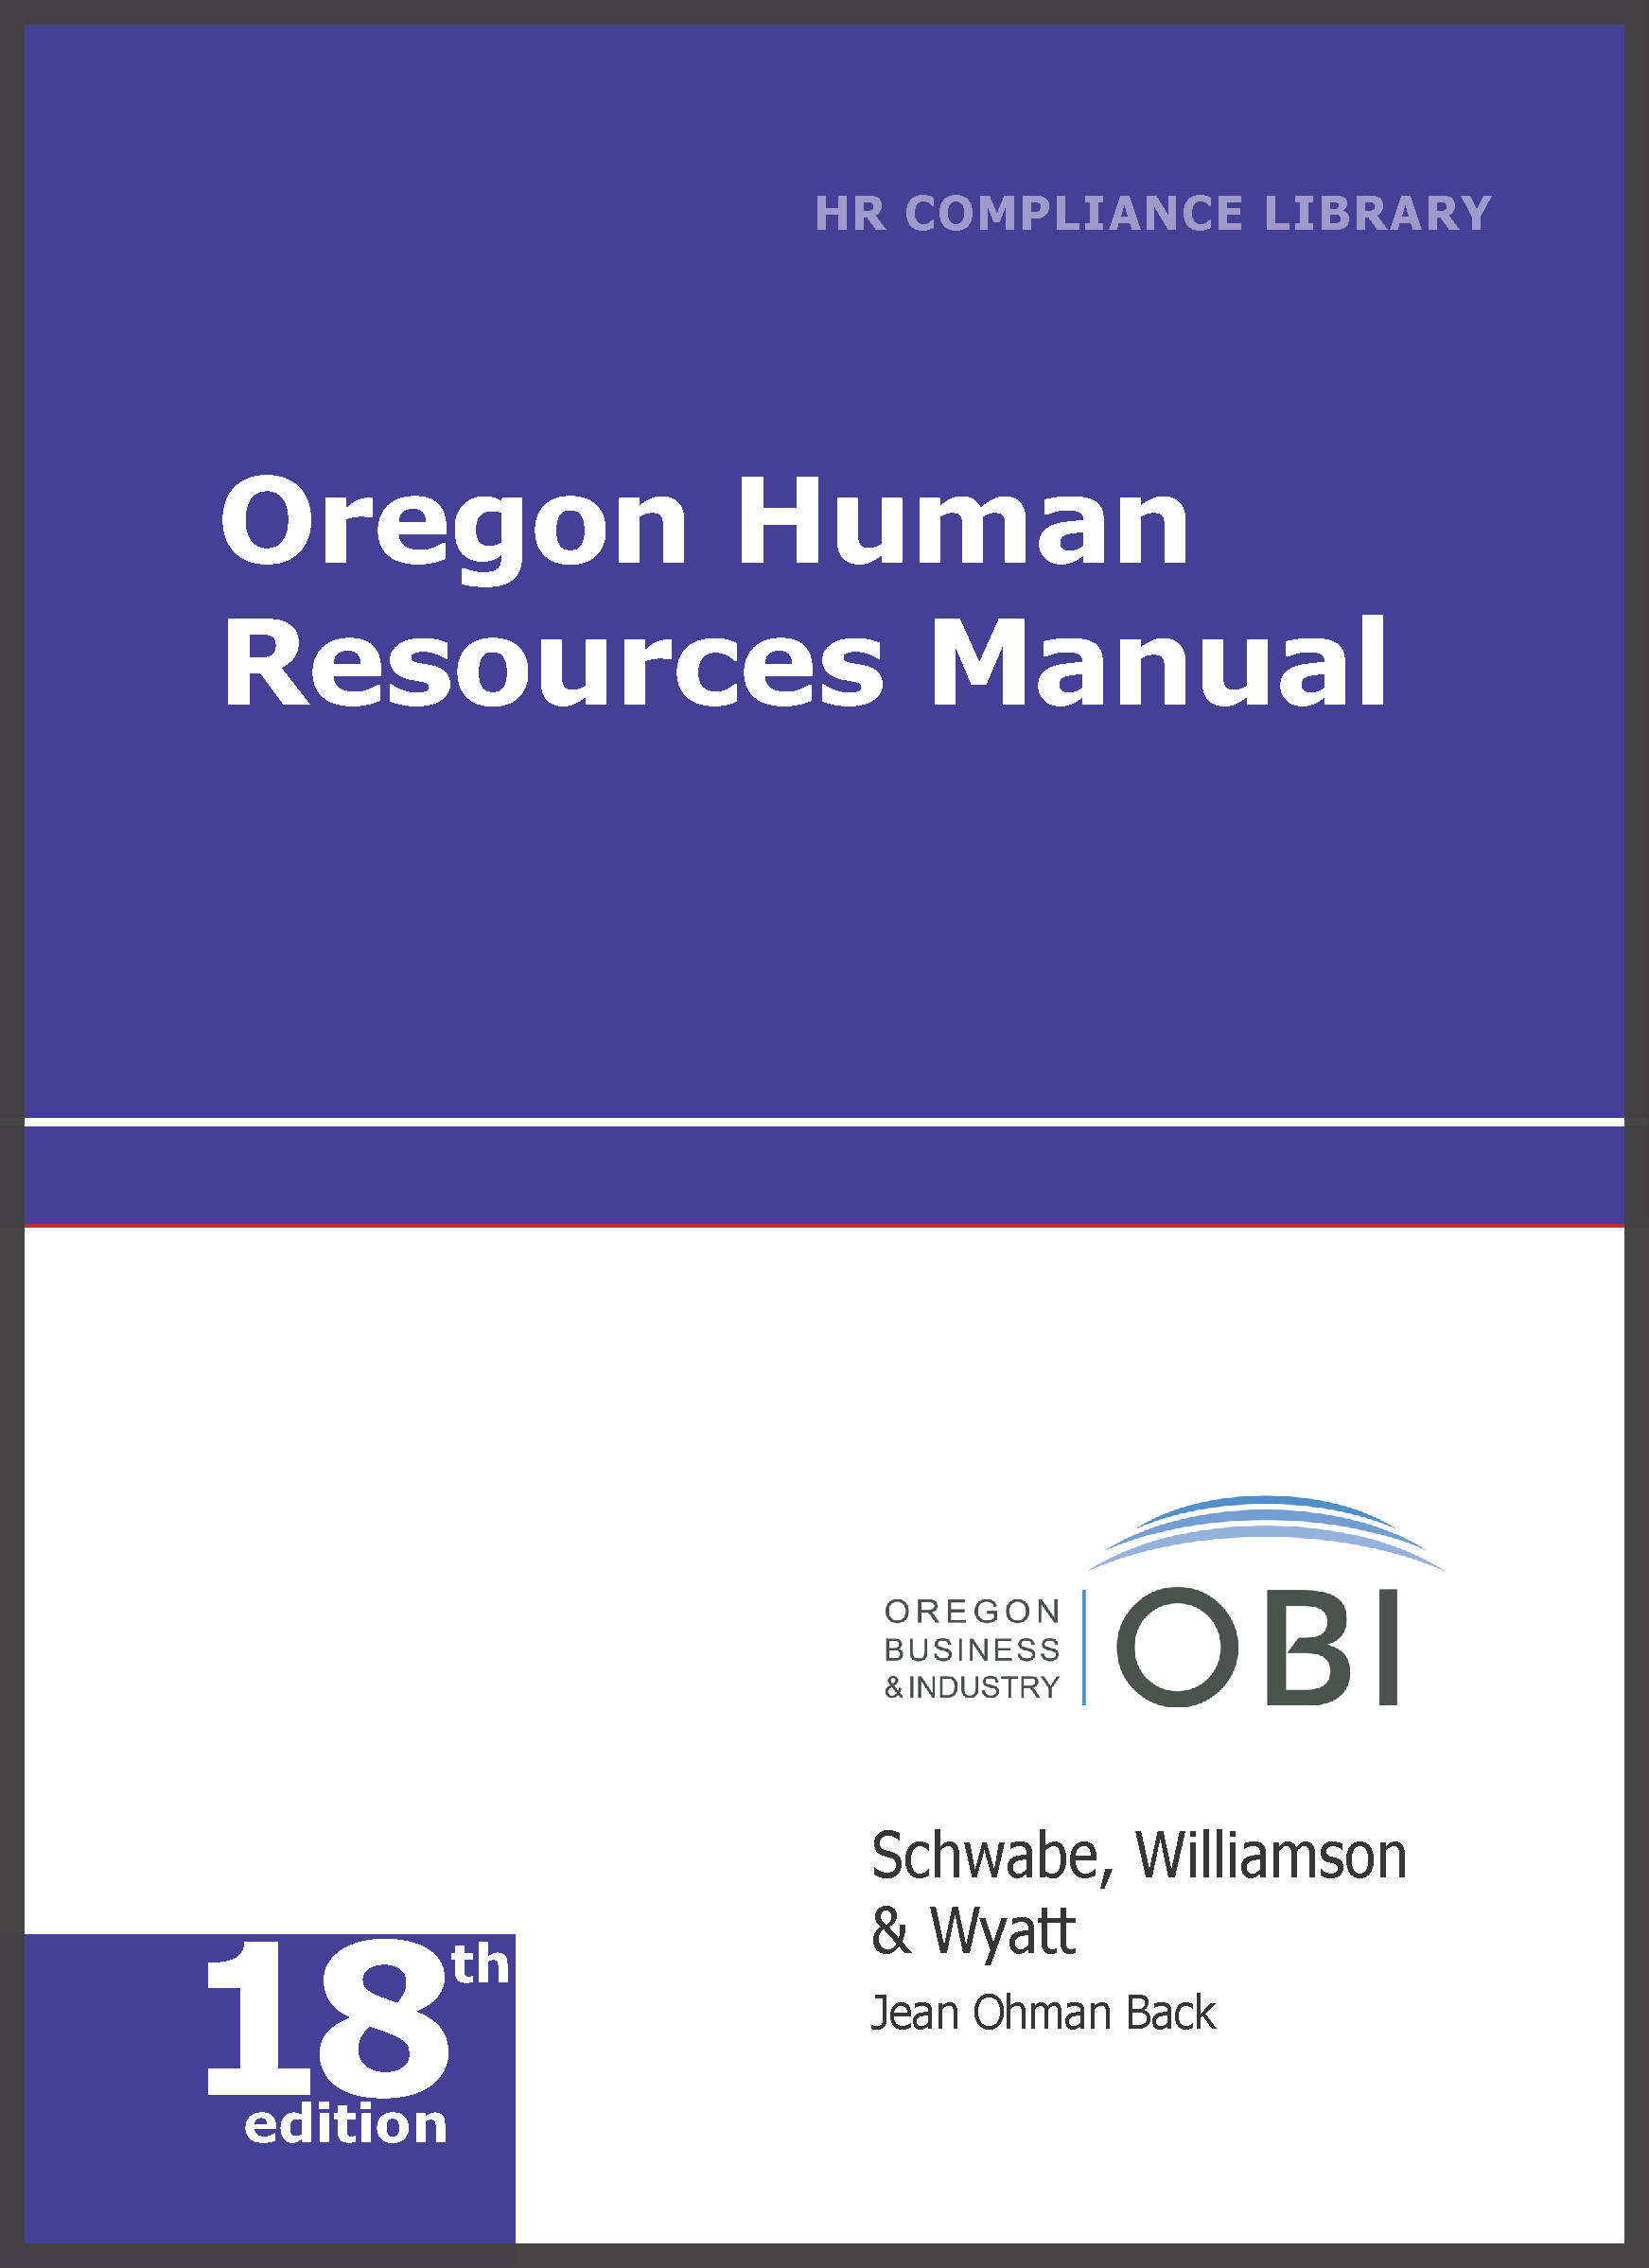 Oregon Human Resources Library  employment law image, remote work, labor laws, employment laws, right to work, order of protection, minimum wage